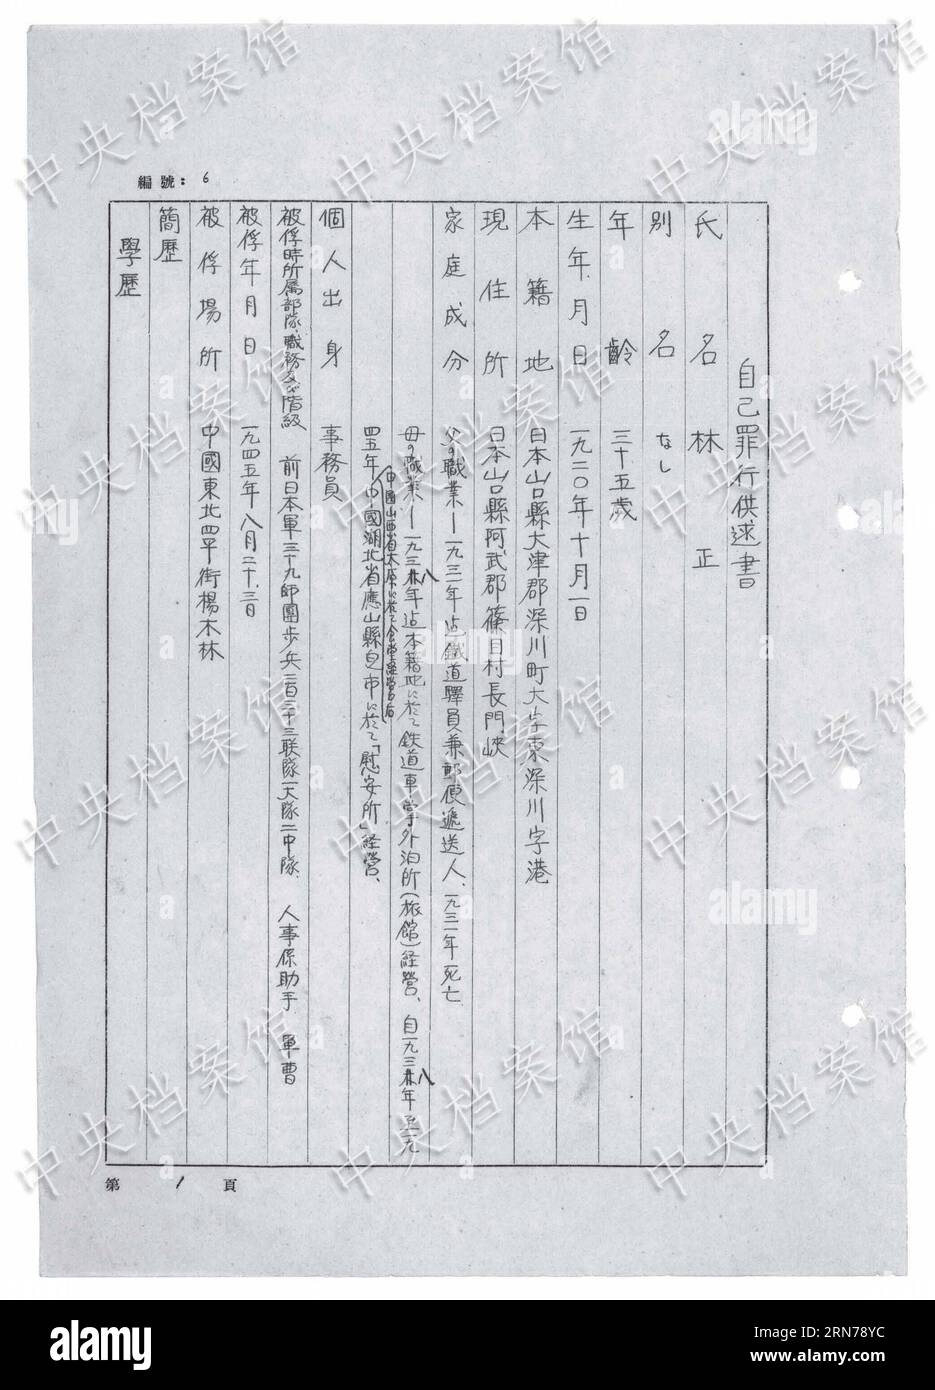 (150826) -- BEIJING, Aug. 26, 2015 () -- Photo released on Aug. 26, 2015 by the State Archives Administration of China on its website shows an excerpt from Japanese war criminal Tadashi Hayashi s handwritten confession. The sixteenth in a series of 31 handwritten confessions from Japanese war criminals published online, the confession features Tadashi Hayashi, who was born in 1920. He joined the Japanese War of Aggression against China in 1941, and was captured in August 1945. Hayashi wrote that during one anatomy lesson for medical trainees, a military doctor injected a prisoner to put him in Stock Photo